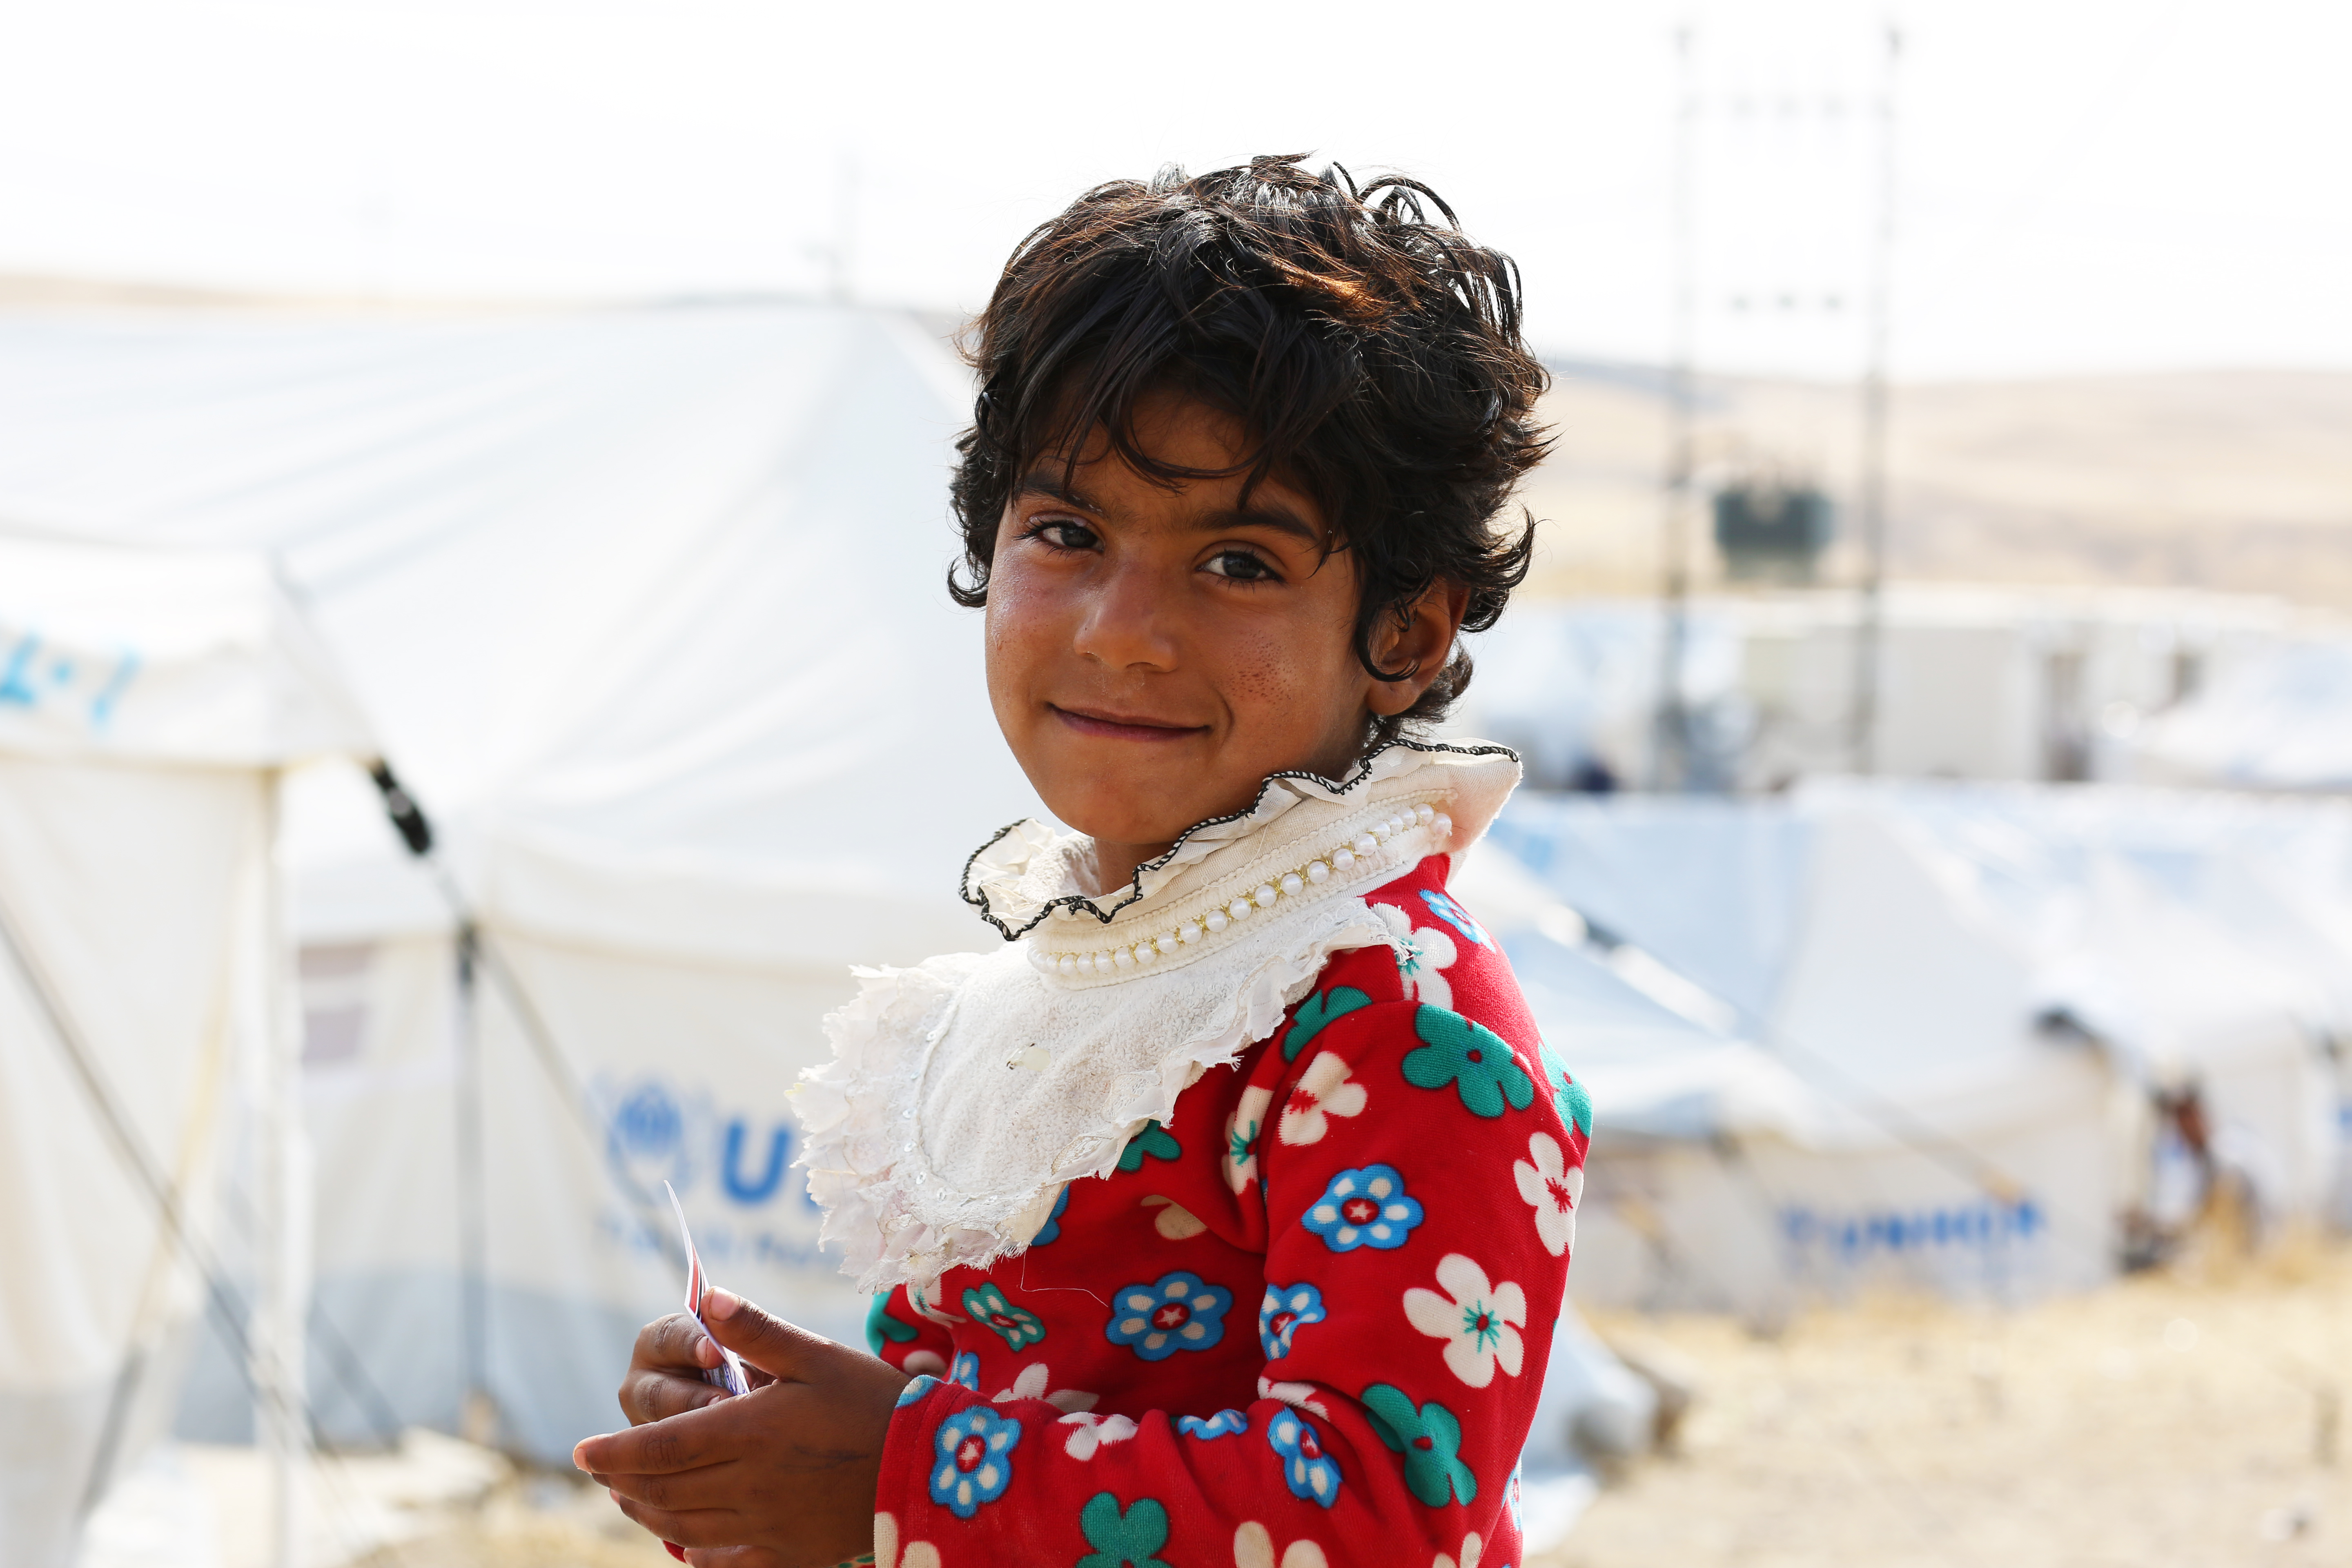 Young Syrian girl in a refugee camp smiles as she stands in front of rows of tents